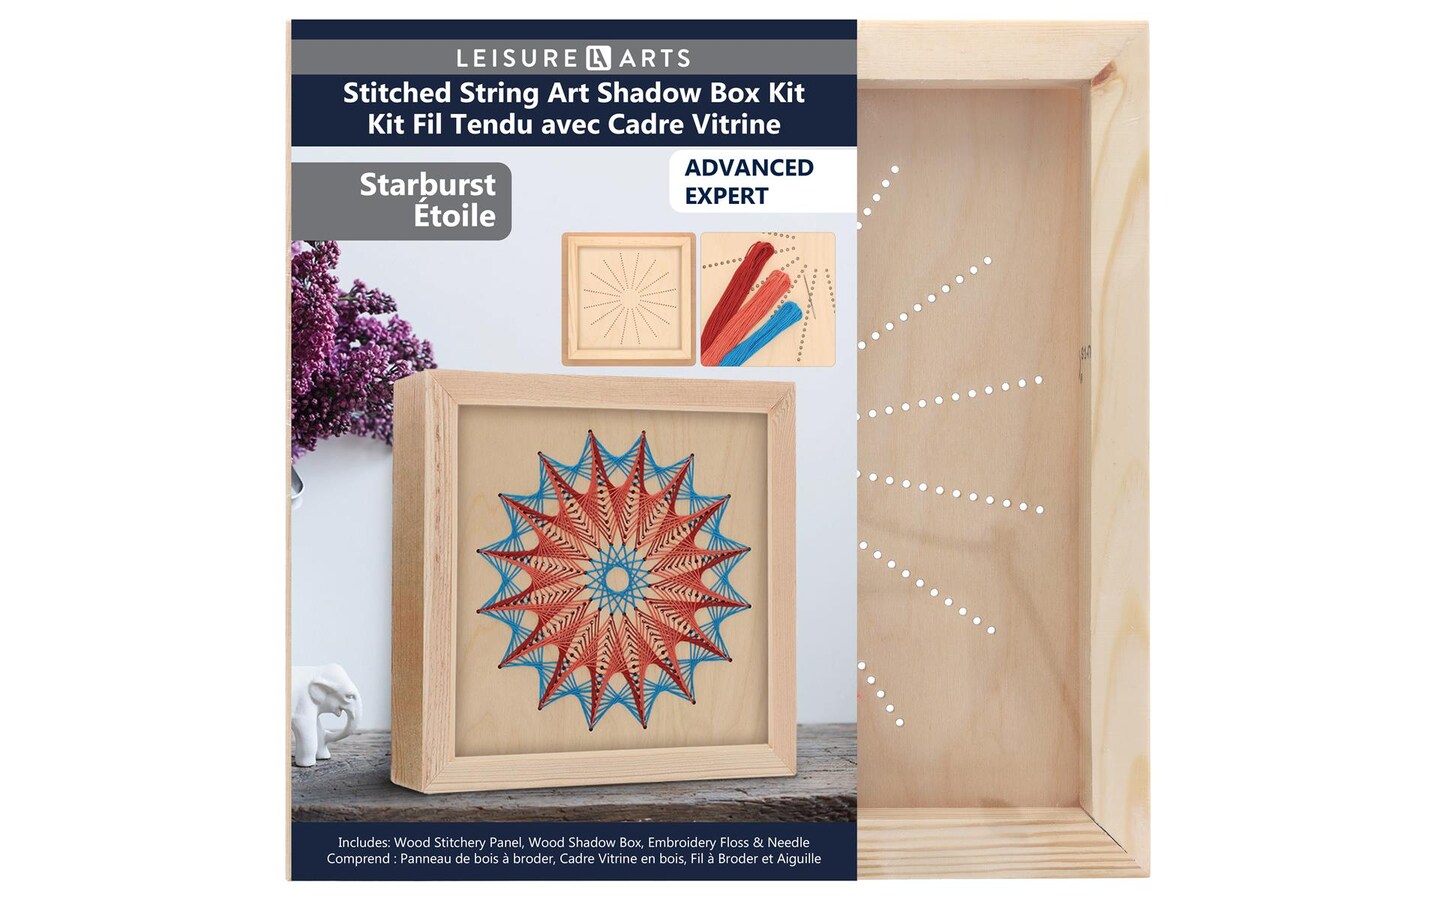 Wood Stitched String Art Kit with Shadow Box Starburst - adult or